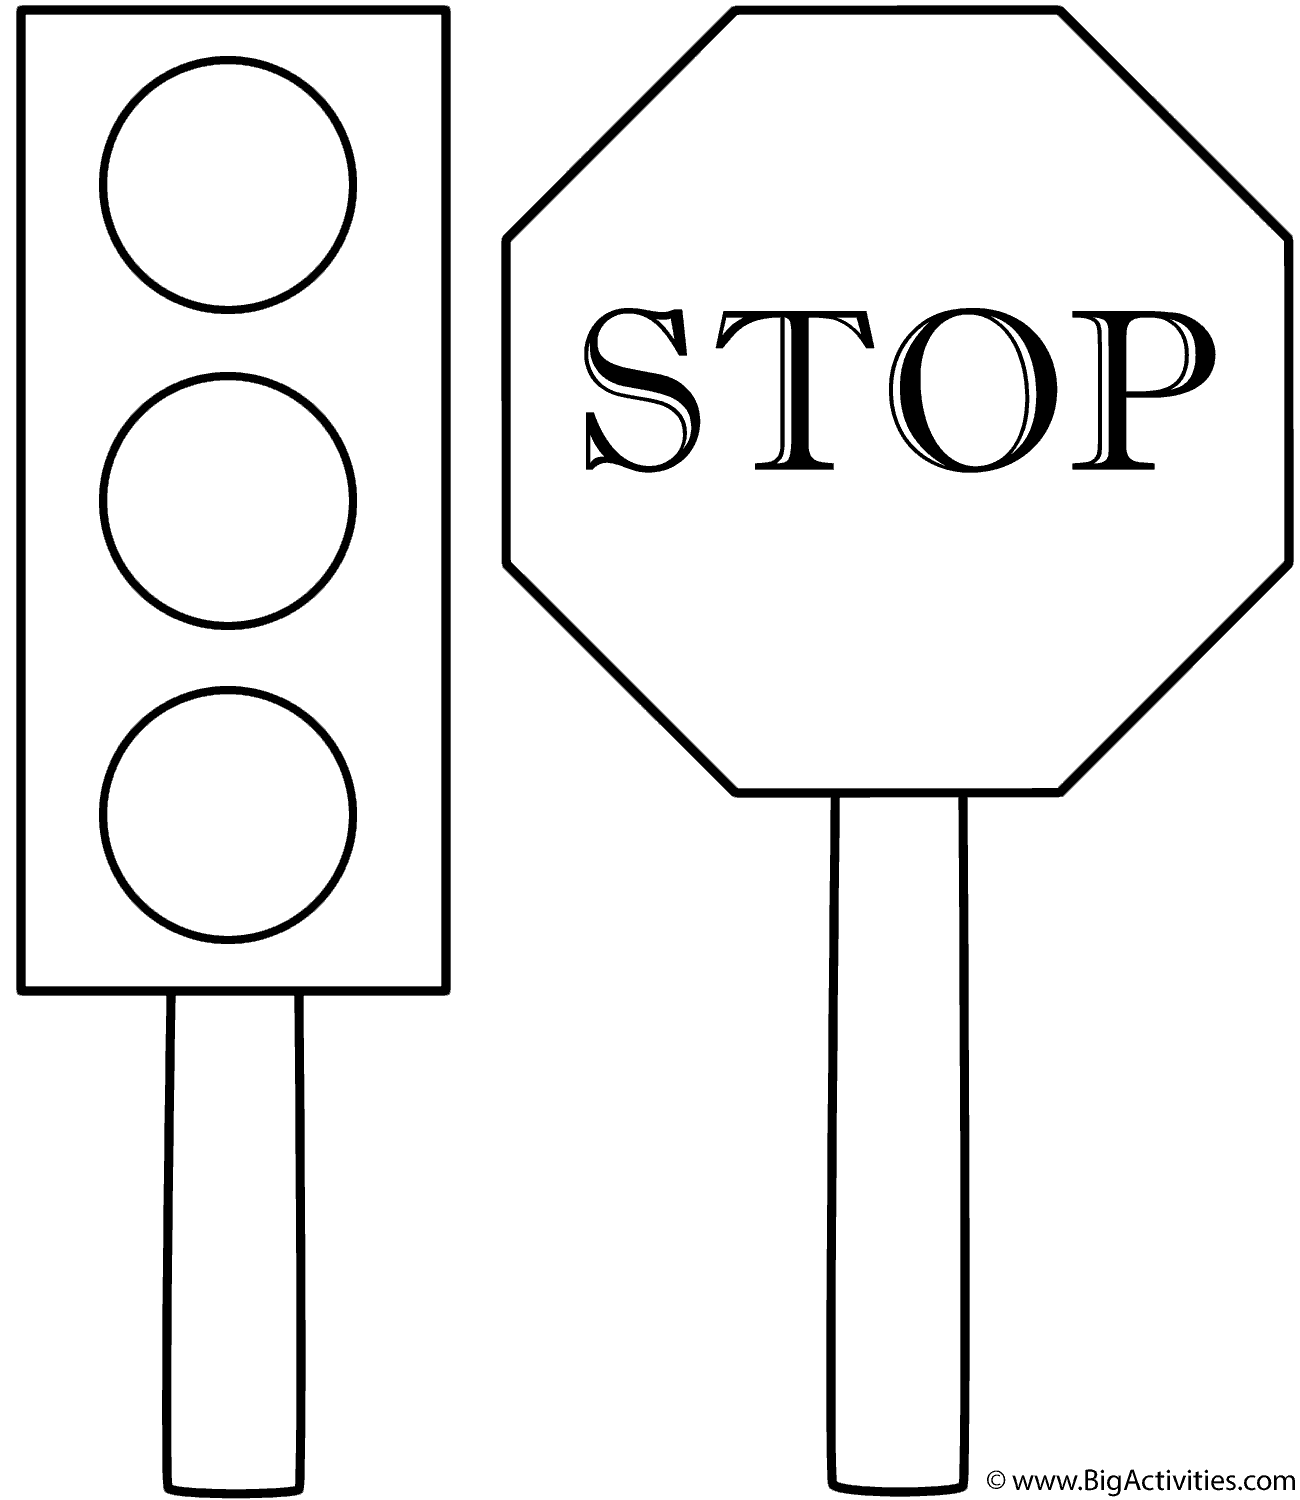 Traffic Light and Stop Sign Coloring Page (Safety)